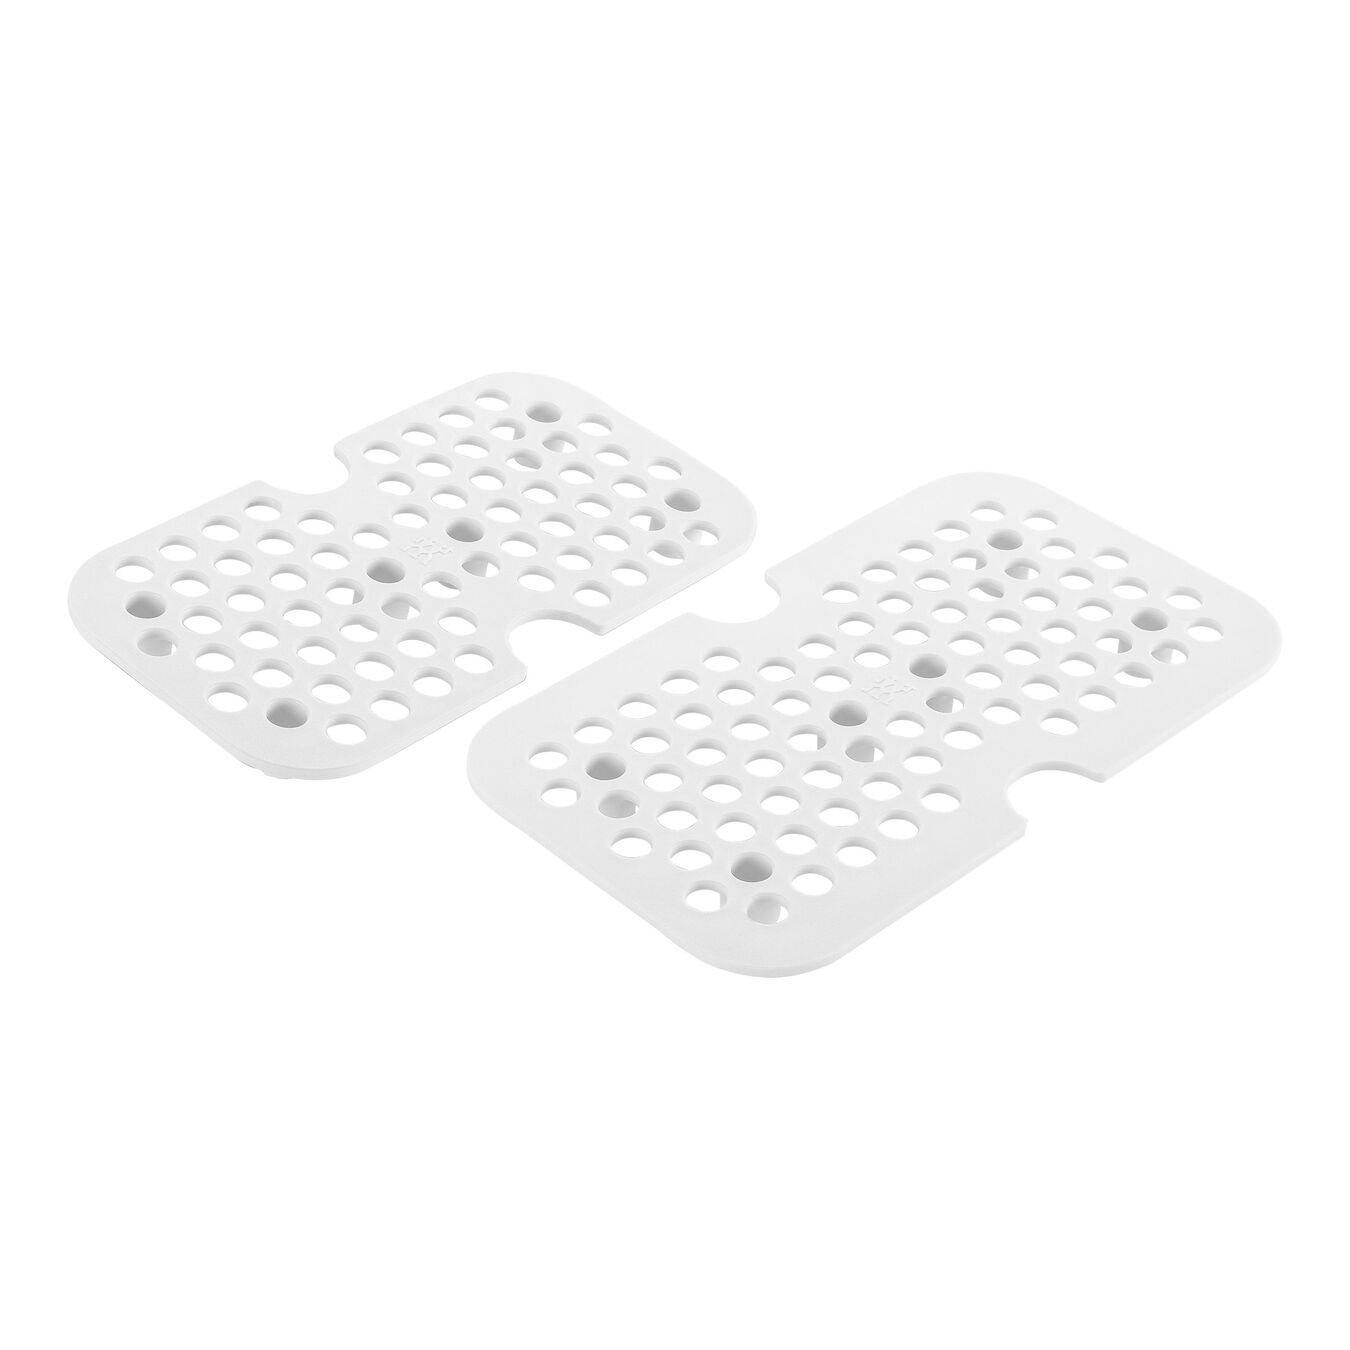 Vacuum accessory set drip tray for glass boxes, medium/large / 2 Piece,,large 1